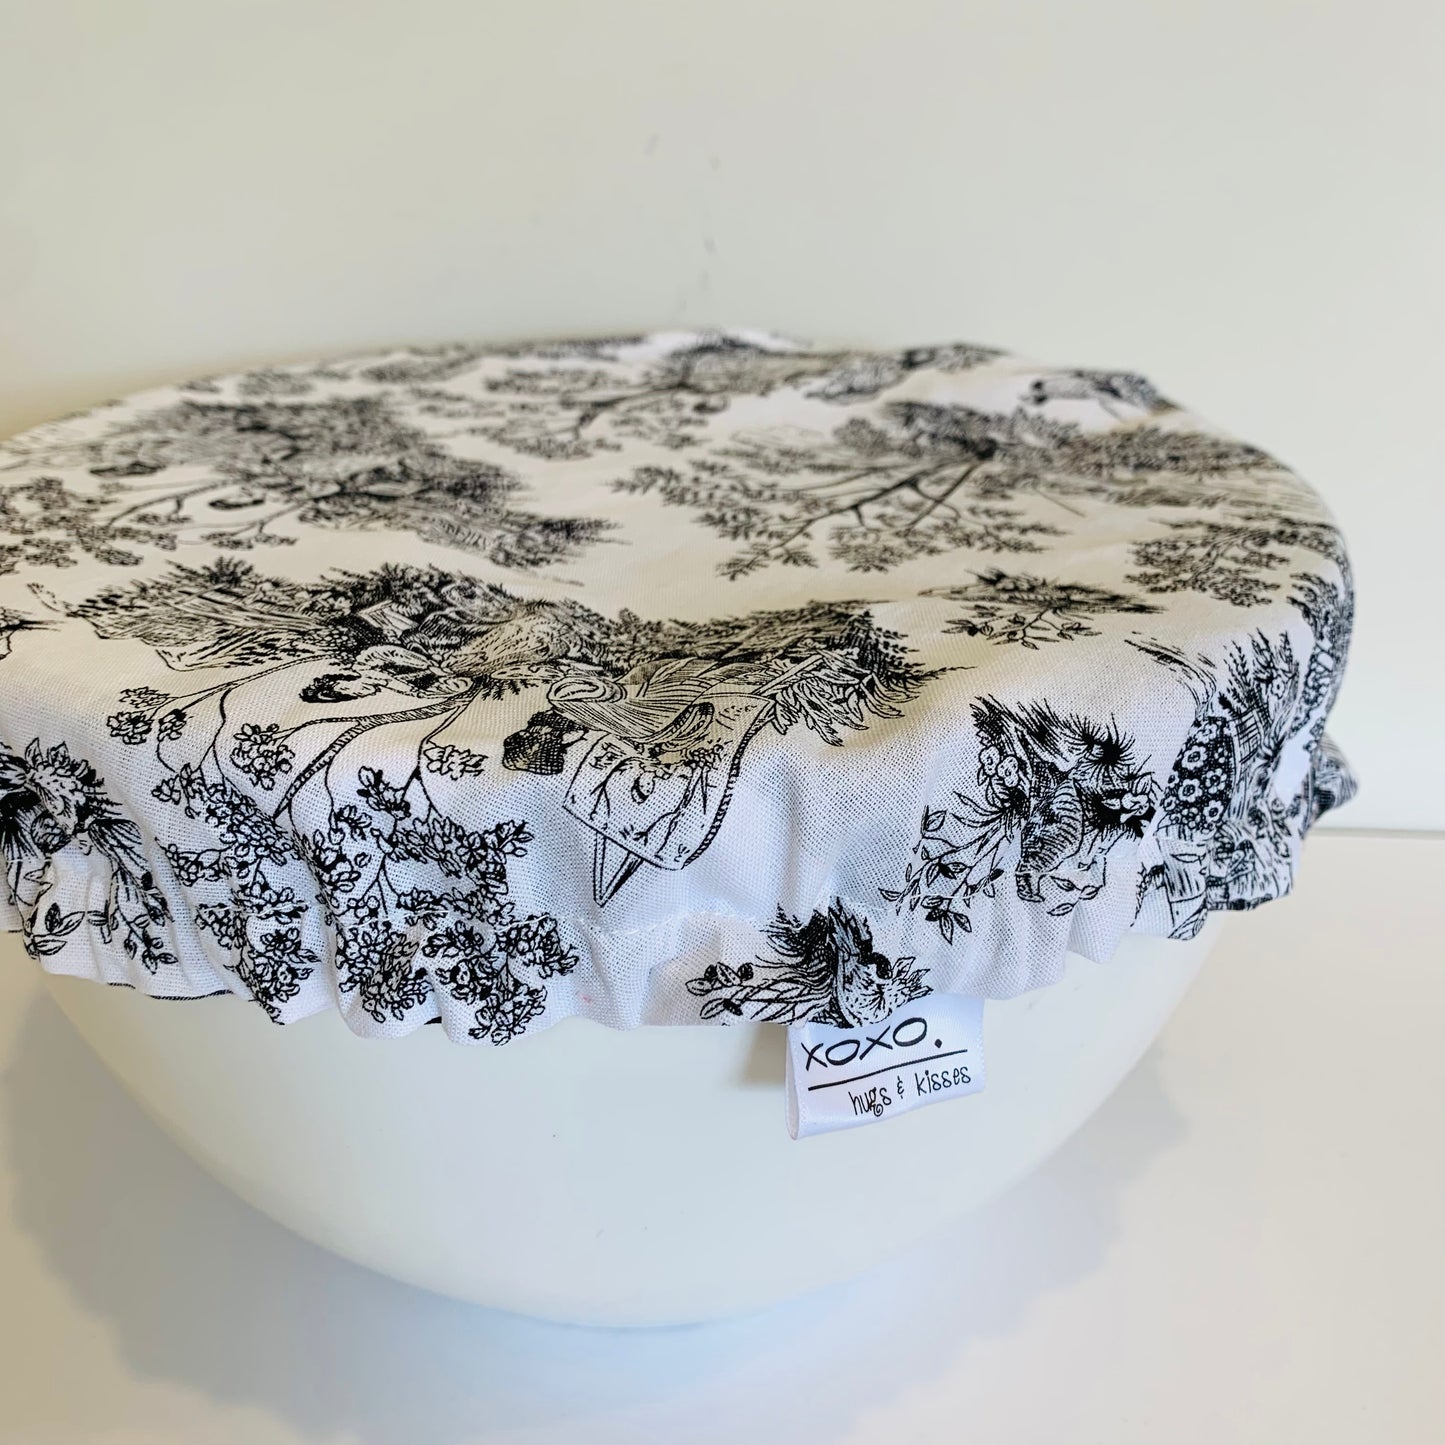 Fabric Bowl Covers - XL